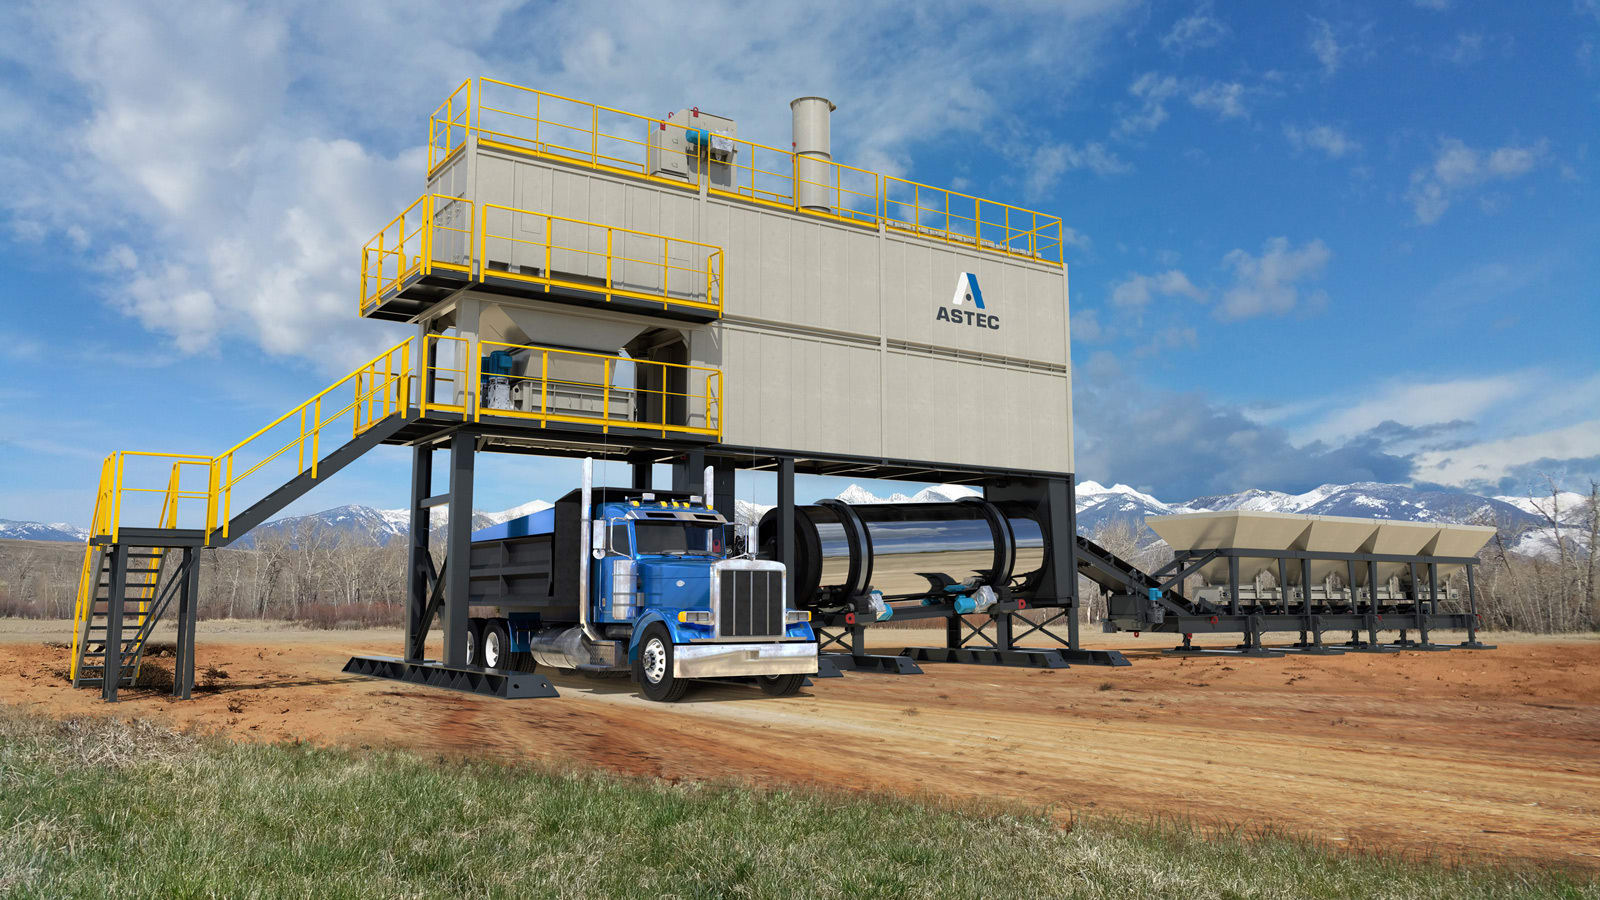 ASTEC is a manufacturer of specialized equipment for asphalt road building, aggregate processing, and concrete production